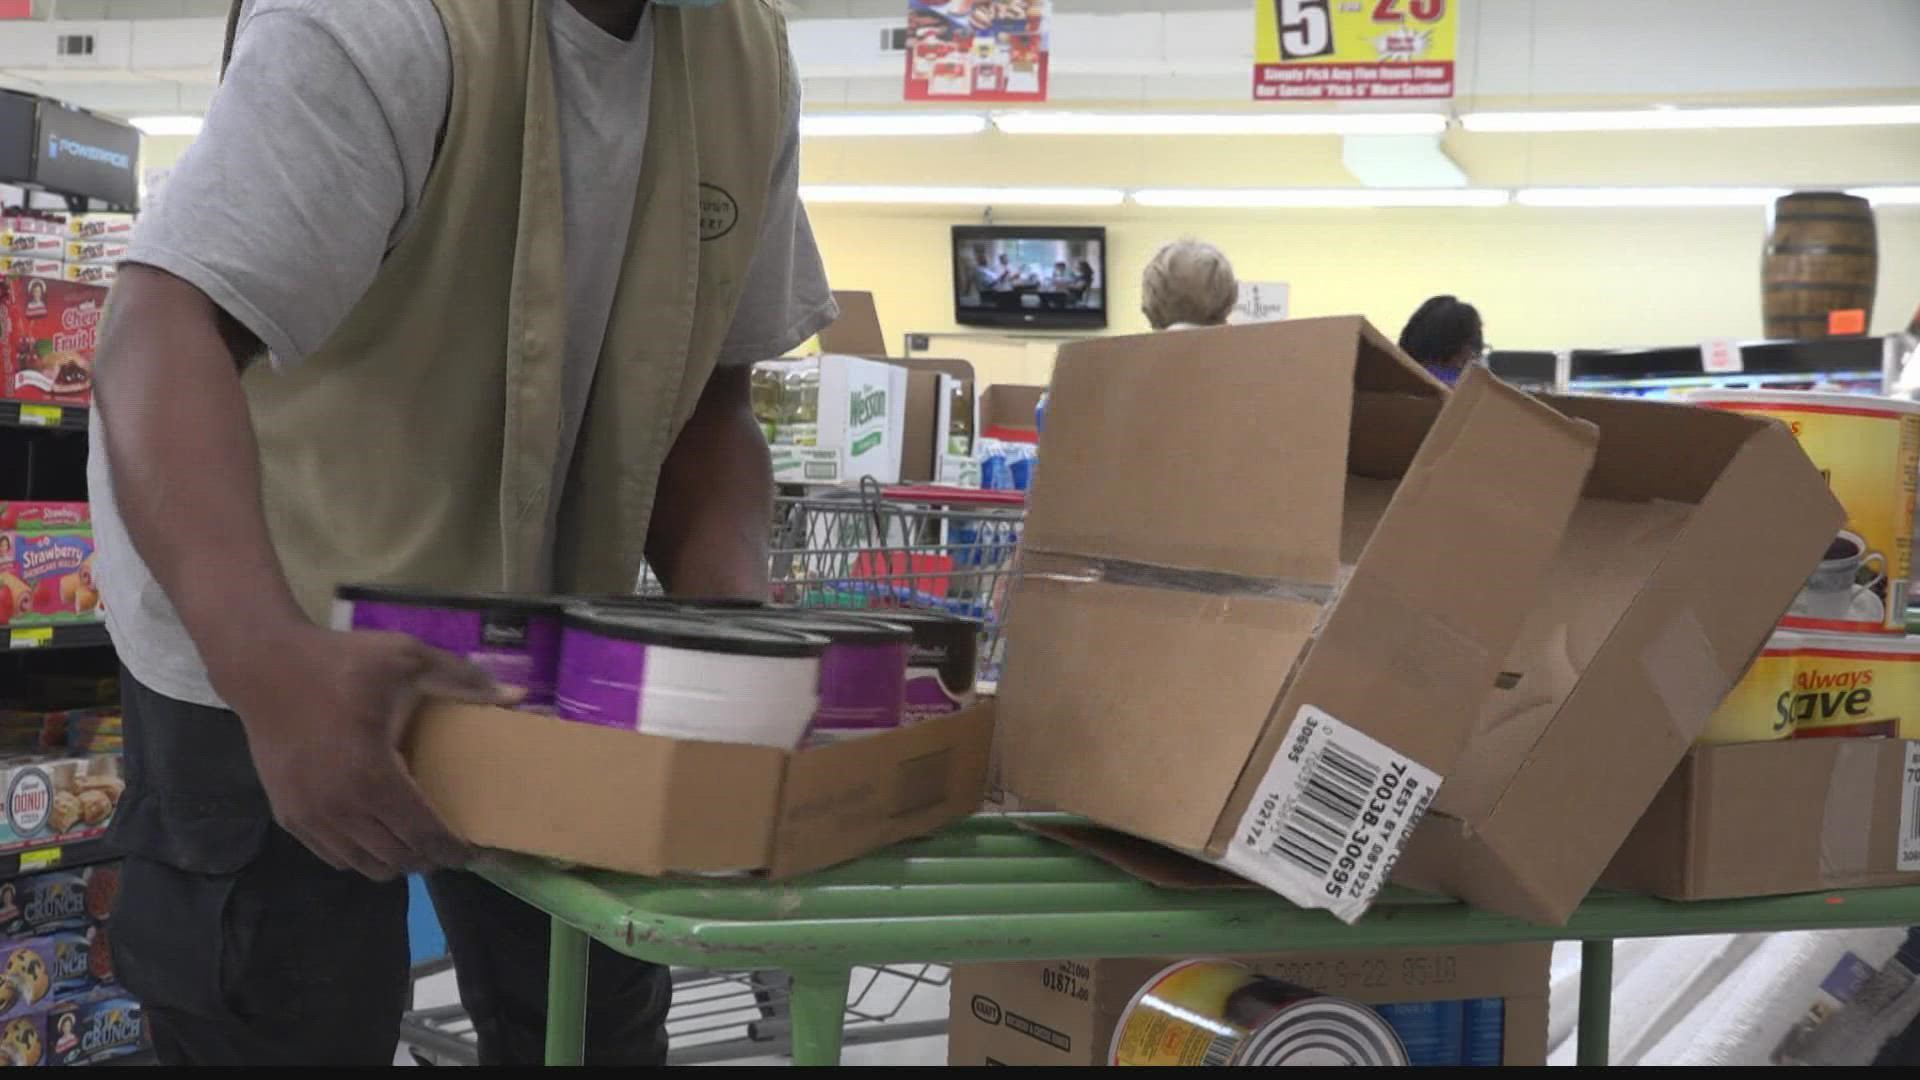 Shortages of supplies and workers are causing problems for local business owners.